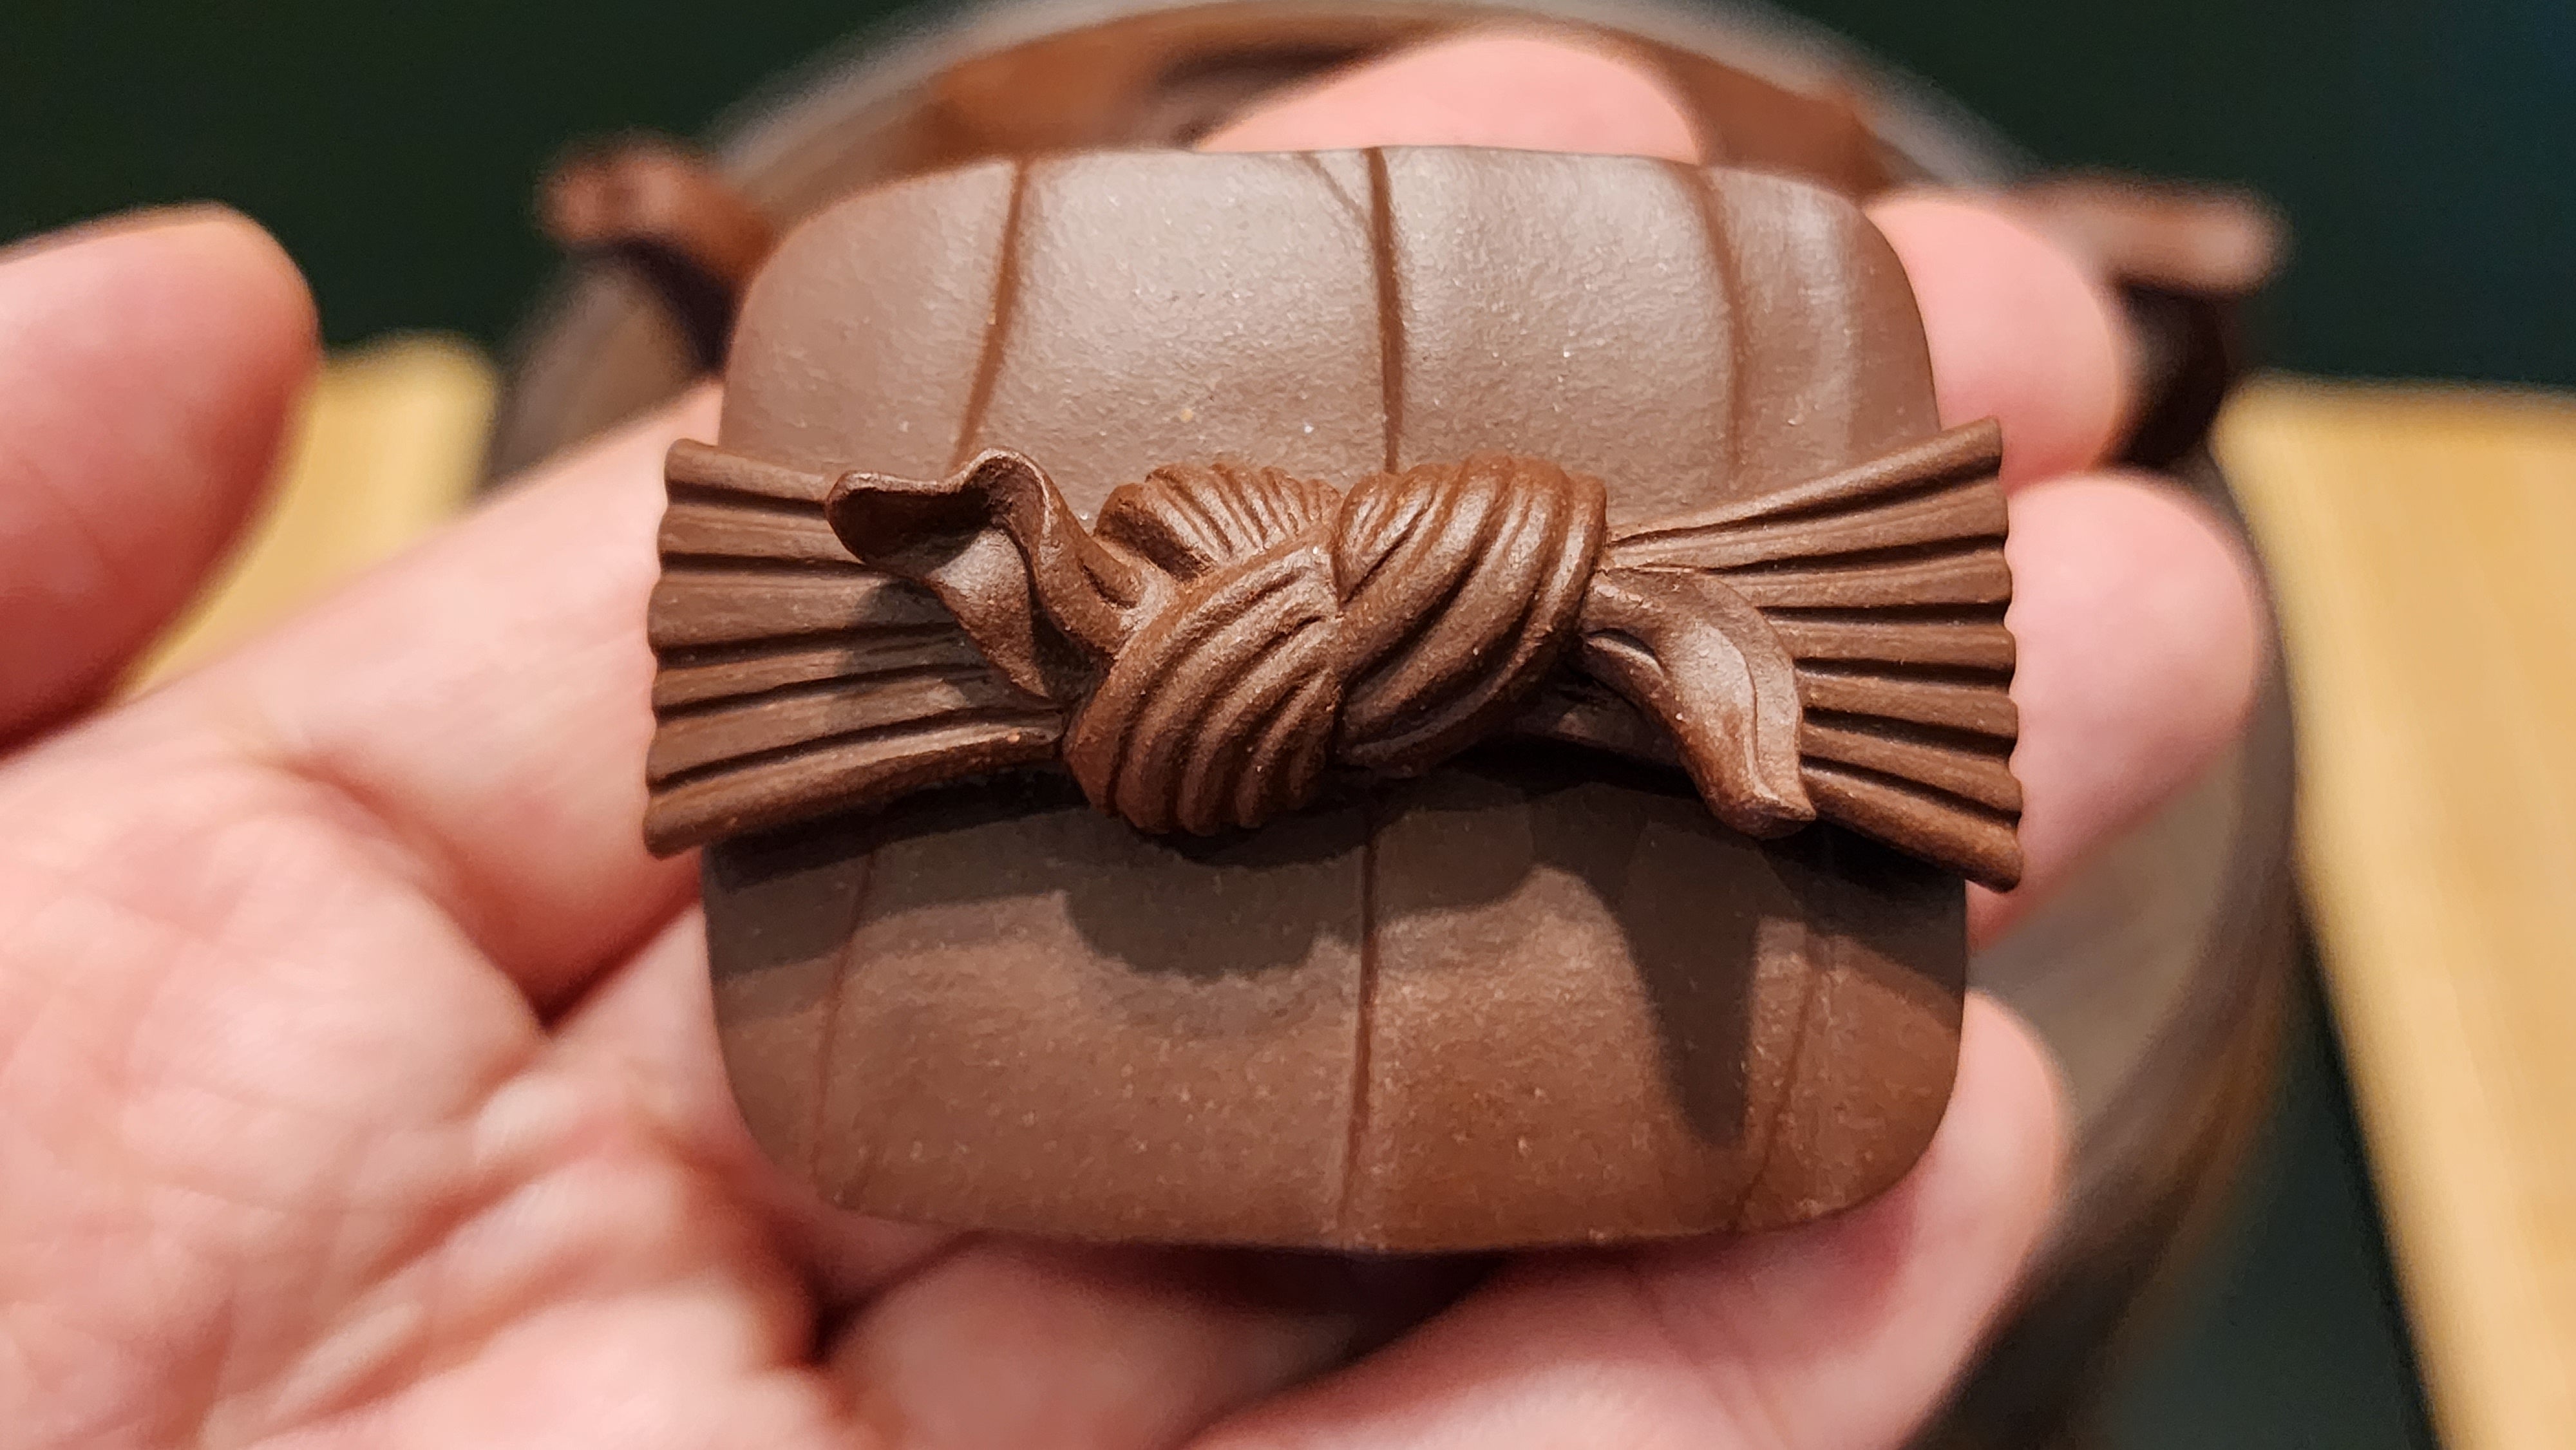 Ming Yuan Yin Bao 鸣远印包, made of the Nationally-Authenticated True 4th Quarry DiCaoQing 国家验证四号井底槽青, Huang Long Yuan certification, crafted by our L4 Assoc Master Yang Quan Sheng 杨全胜。2 Units ~ both sold, to our patrons in Finland and Vietnam.  Thank you!